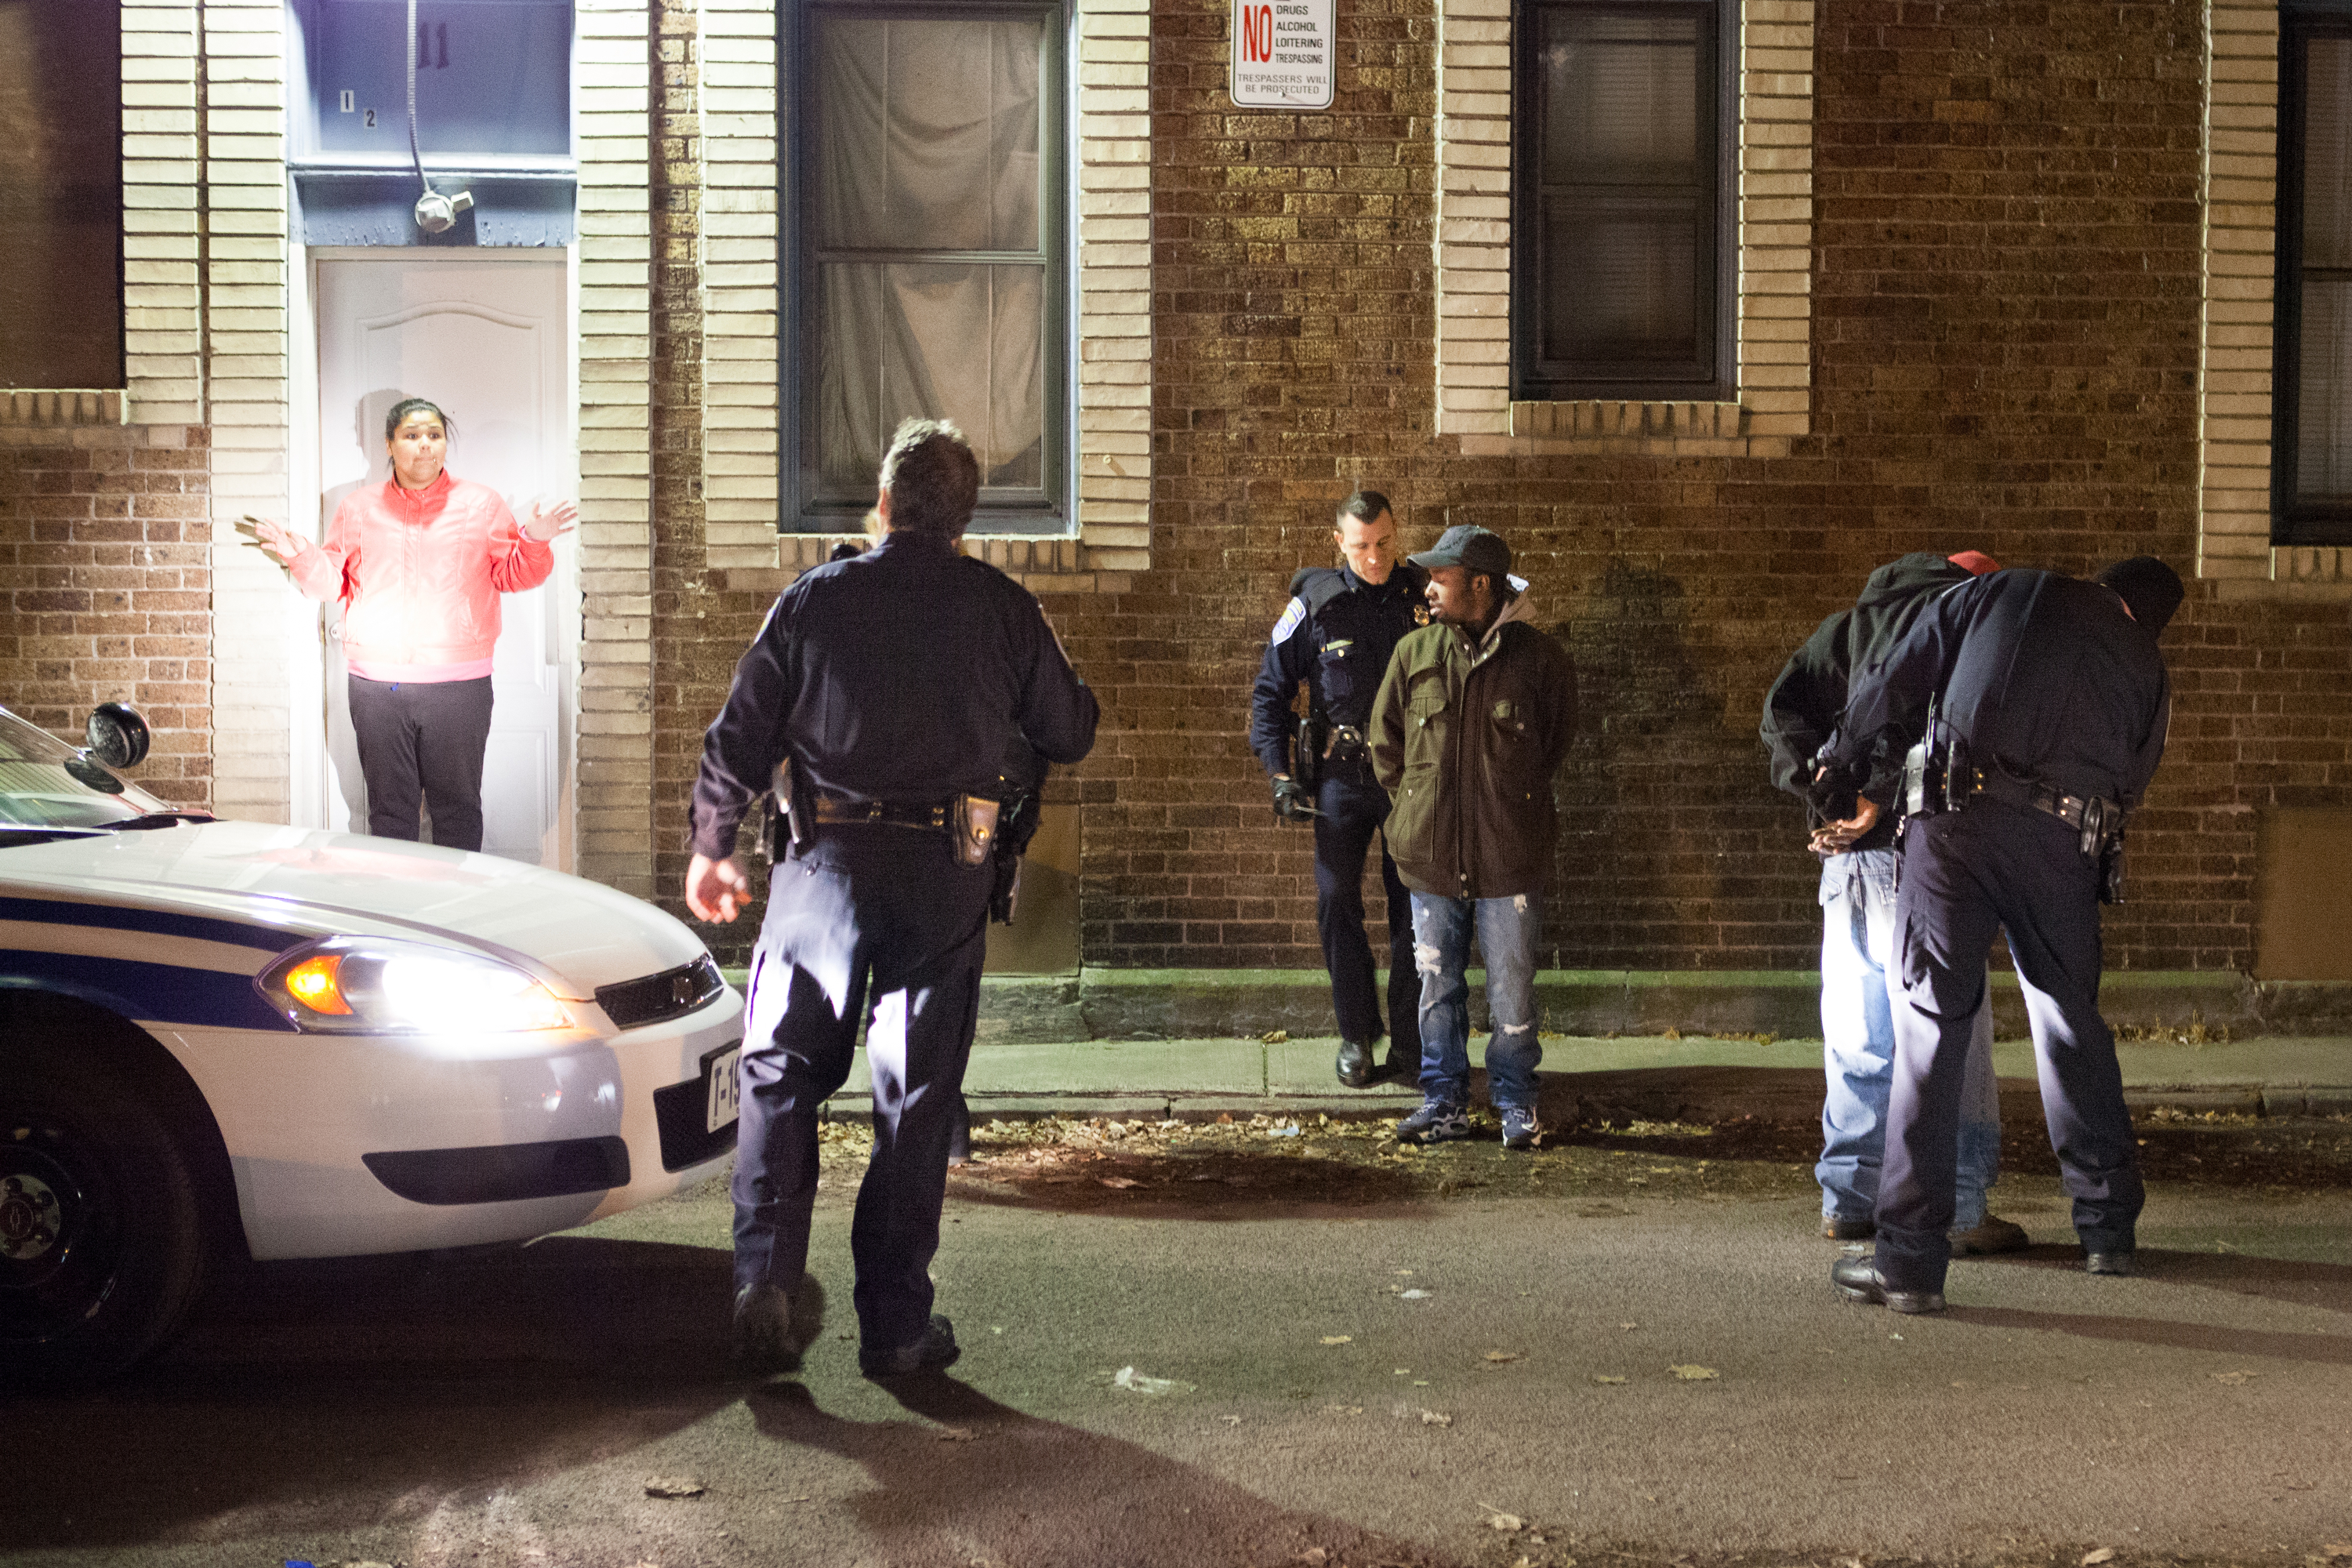 A young woman outside her home reacts to Lieutenant Eric Paul and his officers arresting two men suspected of carrying a weapon in Rochester, N.Y., on Nov. 19, 2013. The two individuals were released immediately after it was determined that they were not who the police were looking for. Photo by Rugile Kaladyte